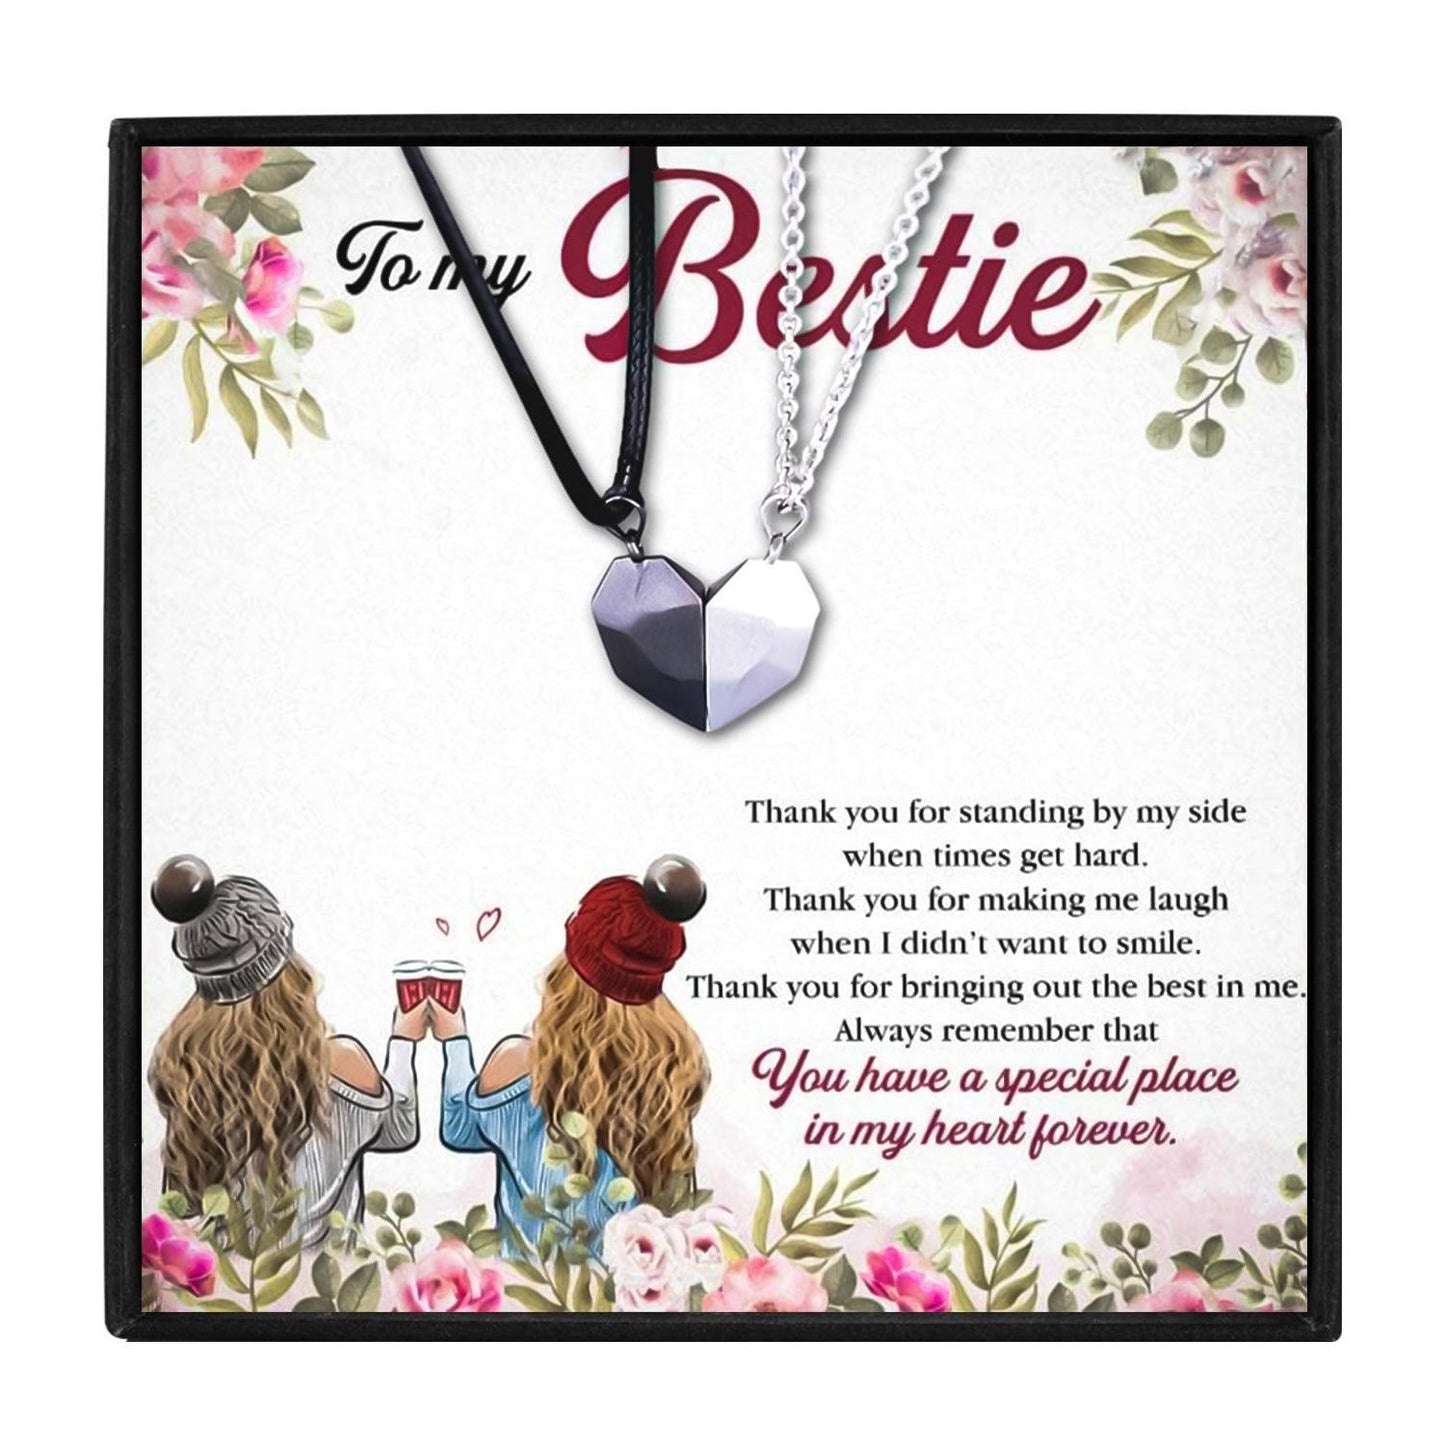 BFF Magnetic Best Friend Jewelry Gift Set for Christmas 2023 | BFF Magnetic Best Friend Jewelry Gift Set - undefined | best friend necklace for 2, best friend necklaces magnetic, Friendship Pendant Necklaces, gift ideas for Best Friends, Magnetic Friendship necklace, Magnetic heart Necklace, To My Best Friend Friendship Gift Necklace Set | From Hunny Life | hunnylife.com